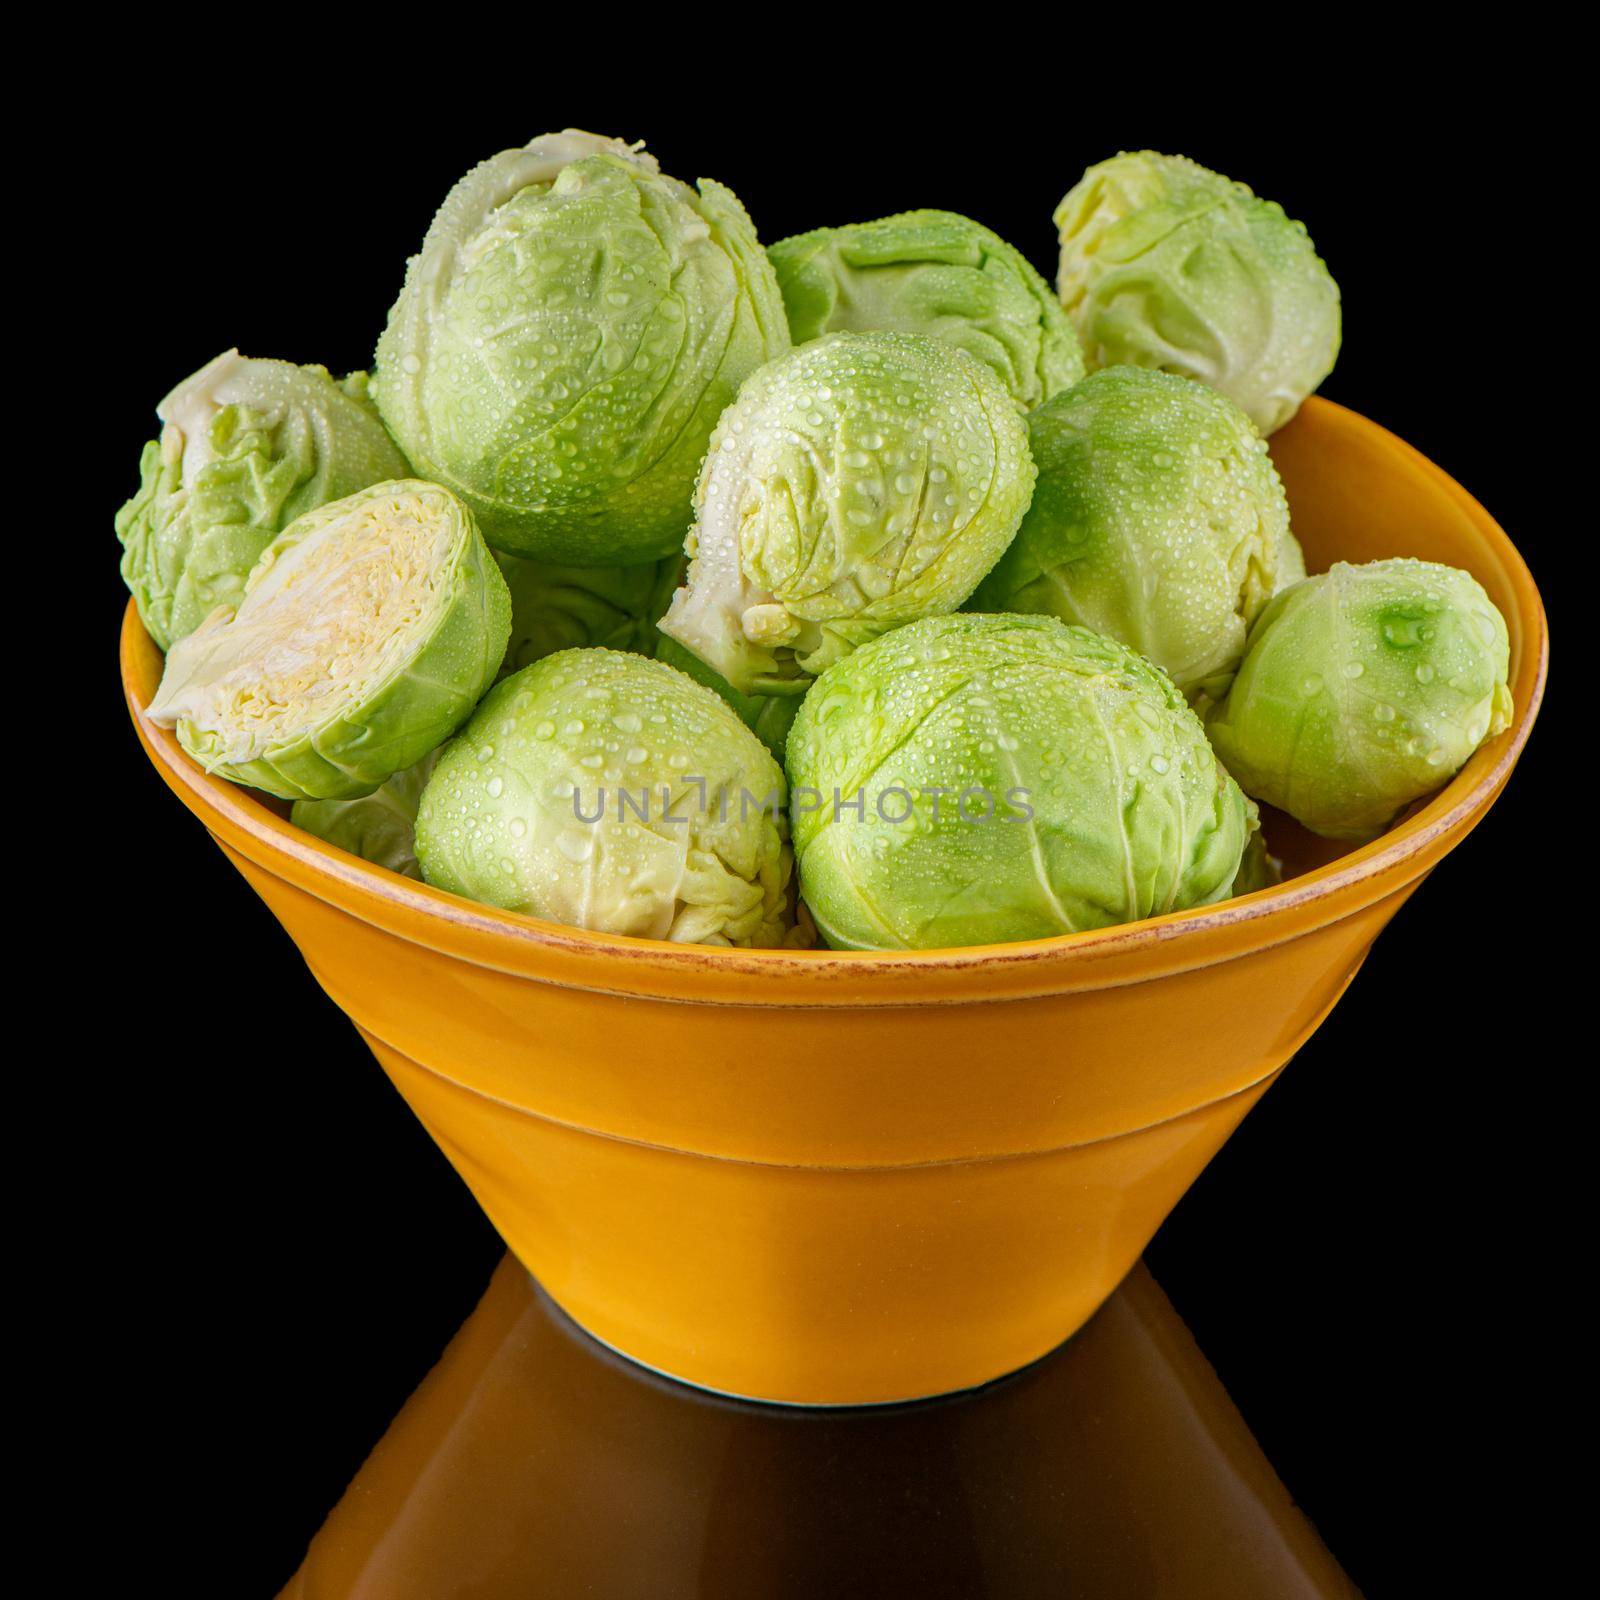 Fresh brussels sprouts by homydesign